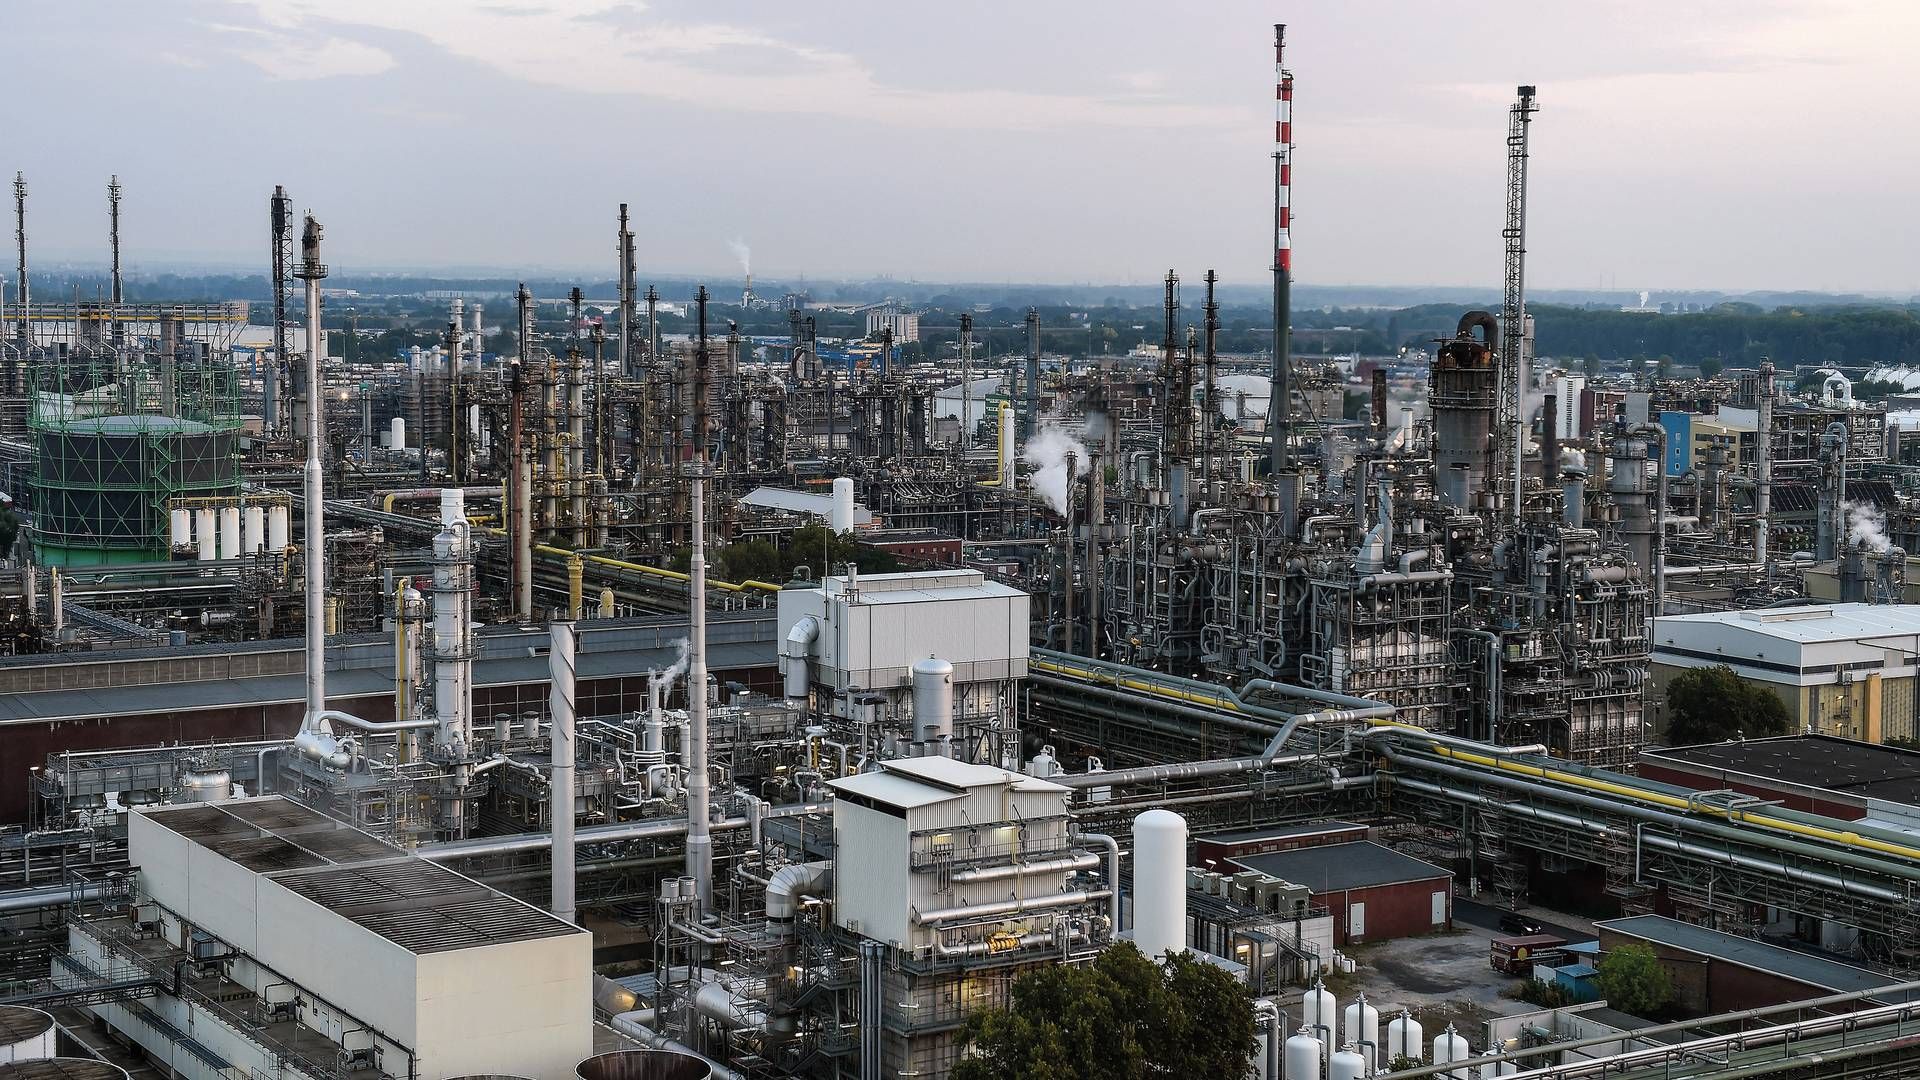 At the BASF production facility in Ludwigshafen, the annual power consumption amounts to approx. 6TWh – or roughly 1% of all of Germany’s electricity demand. | Photo: Basf/pr